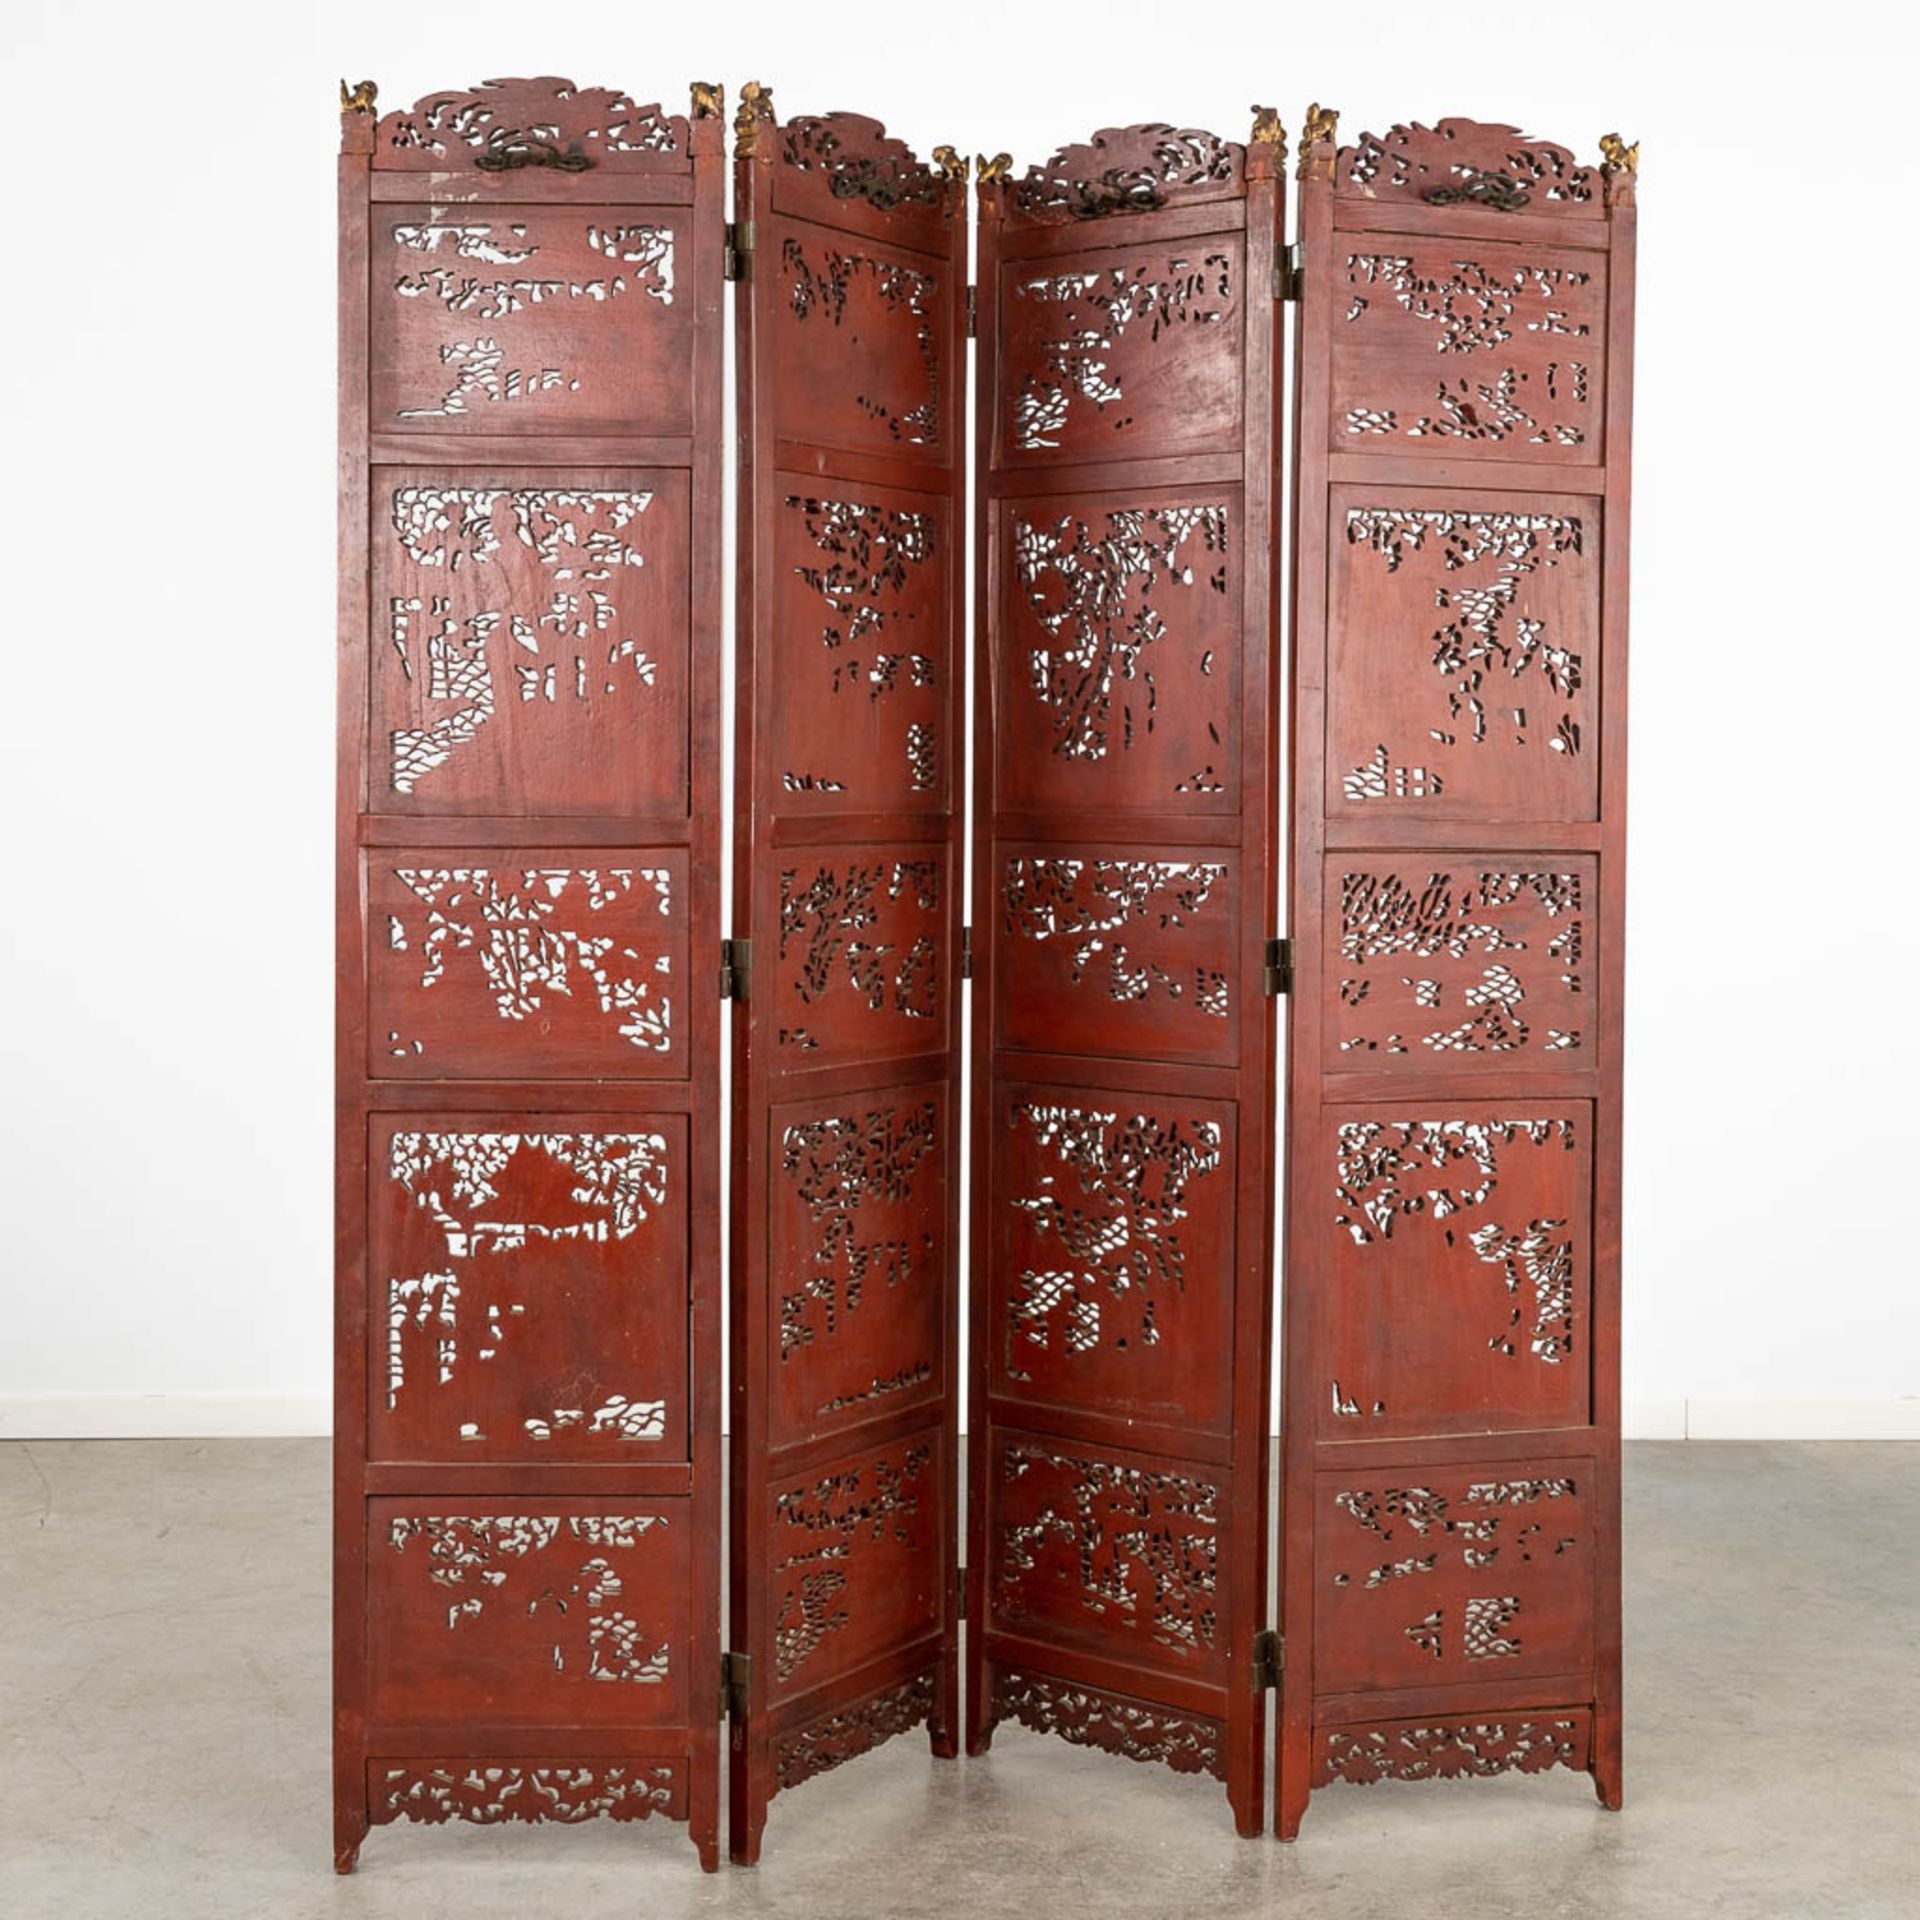 A 4-piece Chinese room divider, sculptured hardwood panels, circa 1900. (W:162 x H:185 cm) - Image 12 of 12